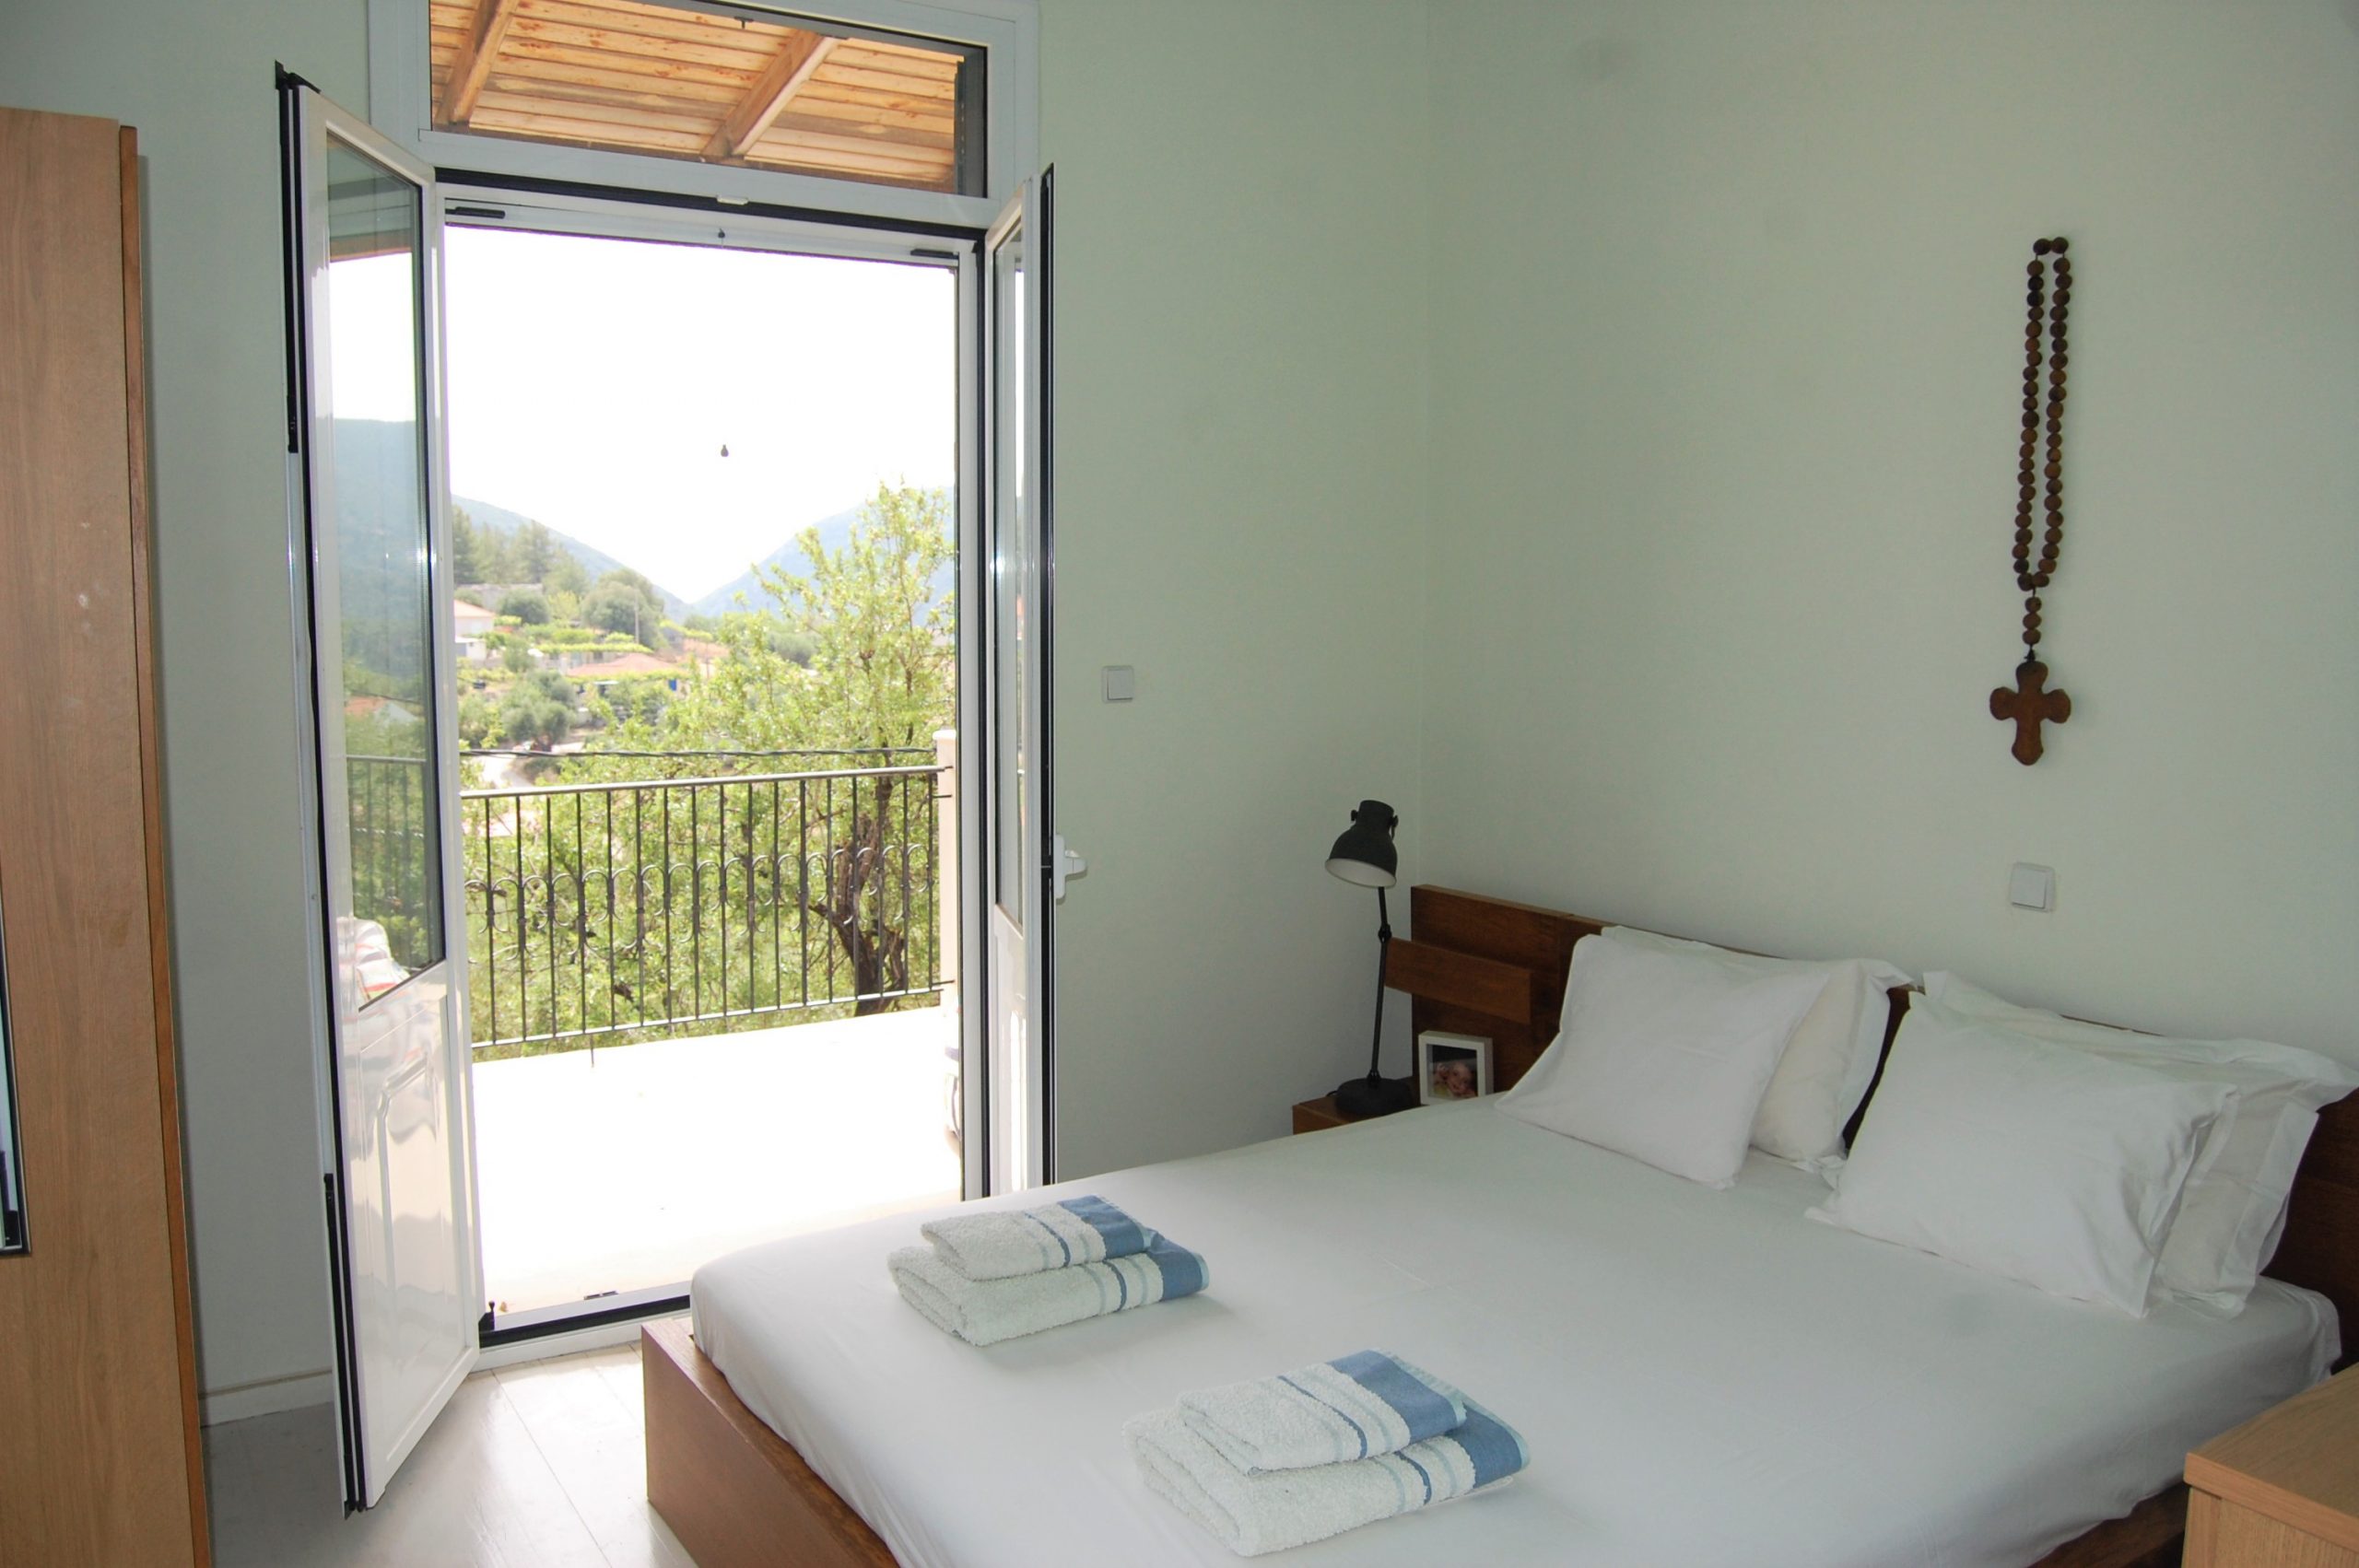 Bedroom of holiday house for rent on Ithaca Greece, Kolleri